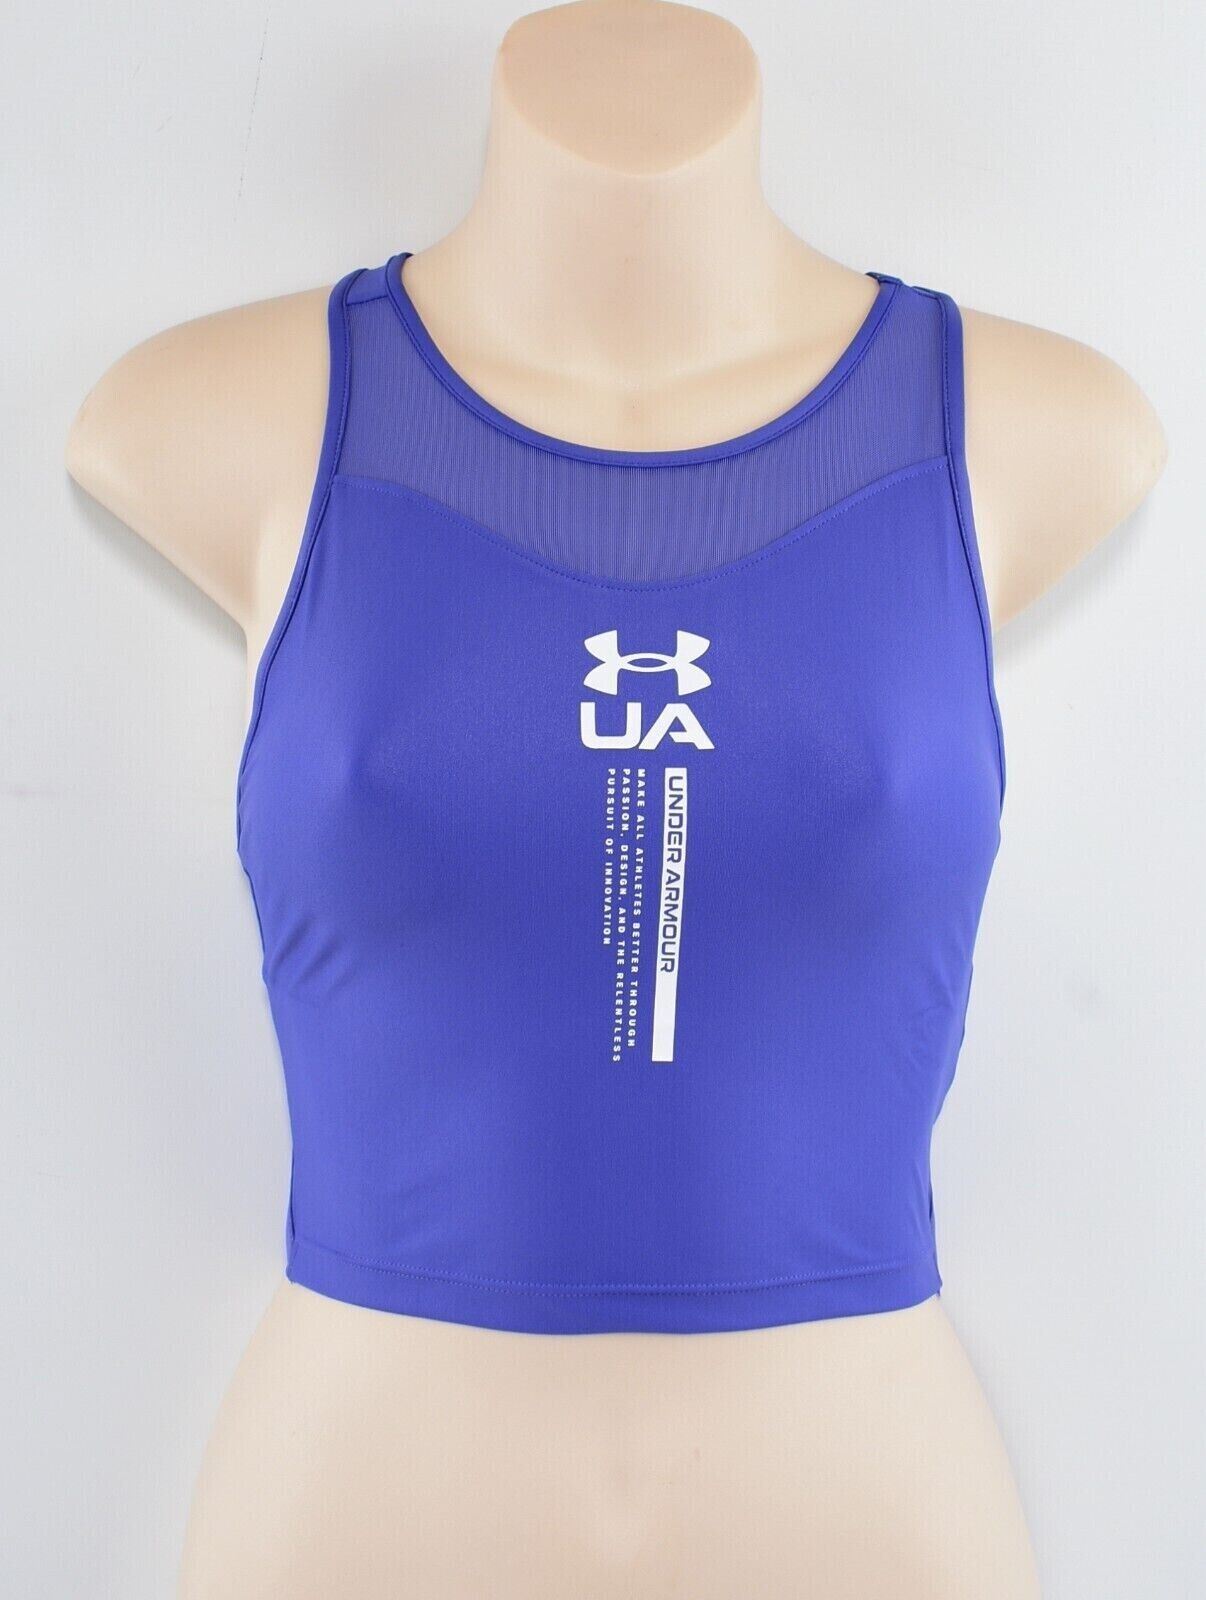 UNDER ARMOUR Women's ISO-CHILL Activewear Crop Top, Isotope Blue, size S (UK 10)